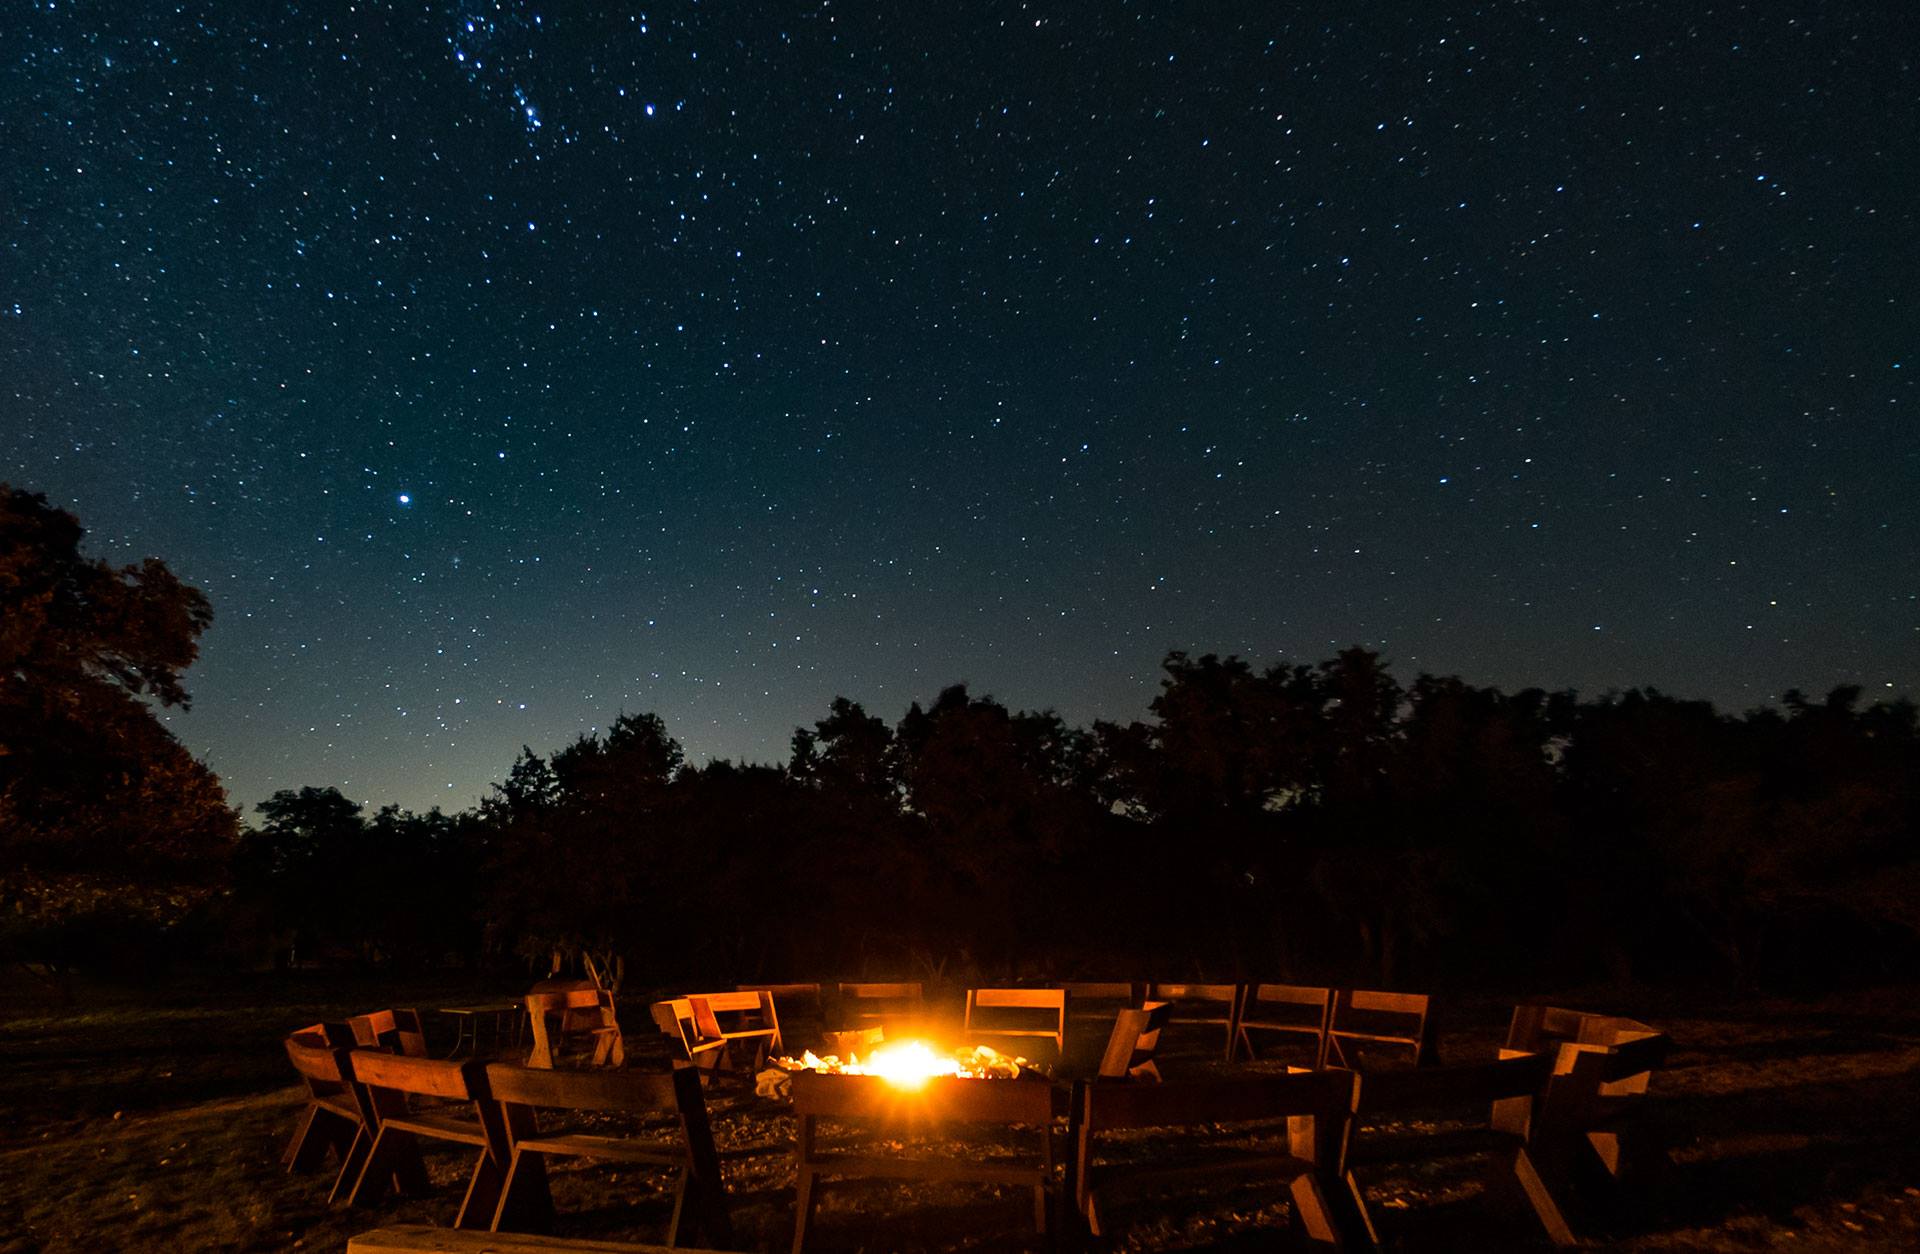 a fire is surrounded by chairs under a starry night sky